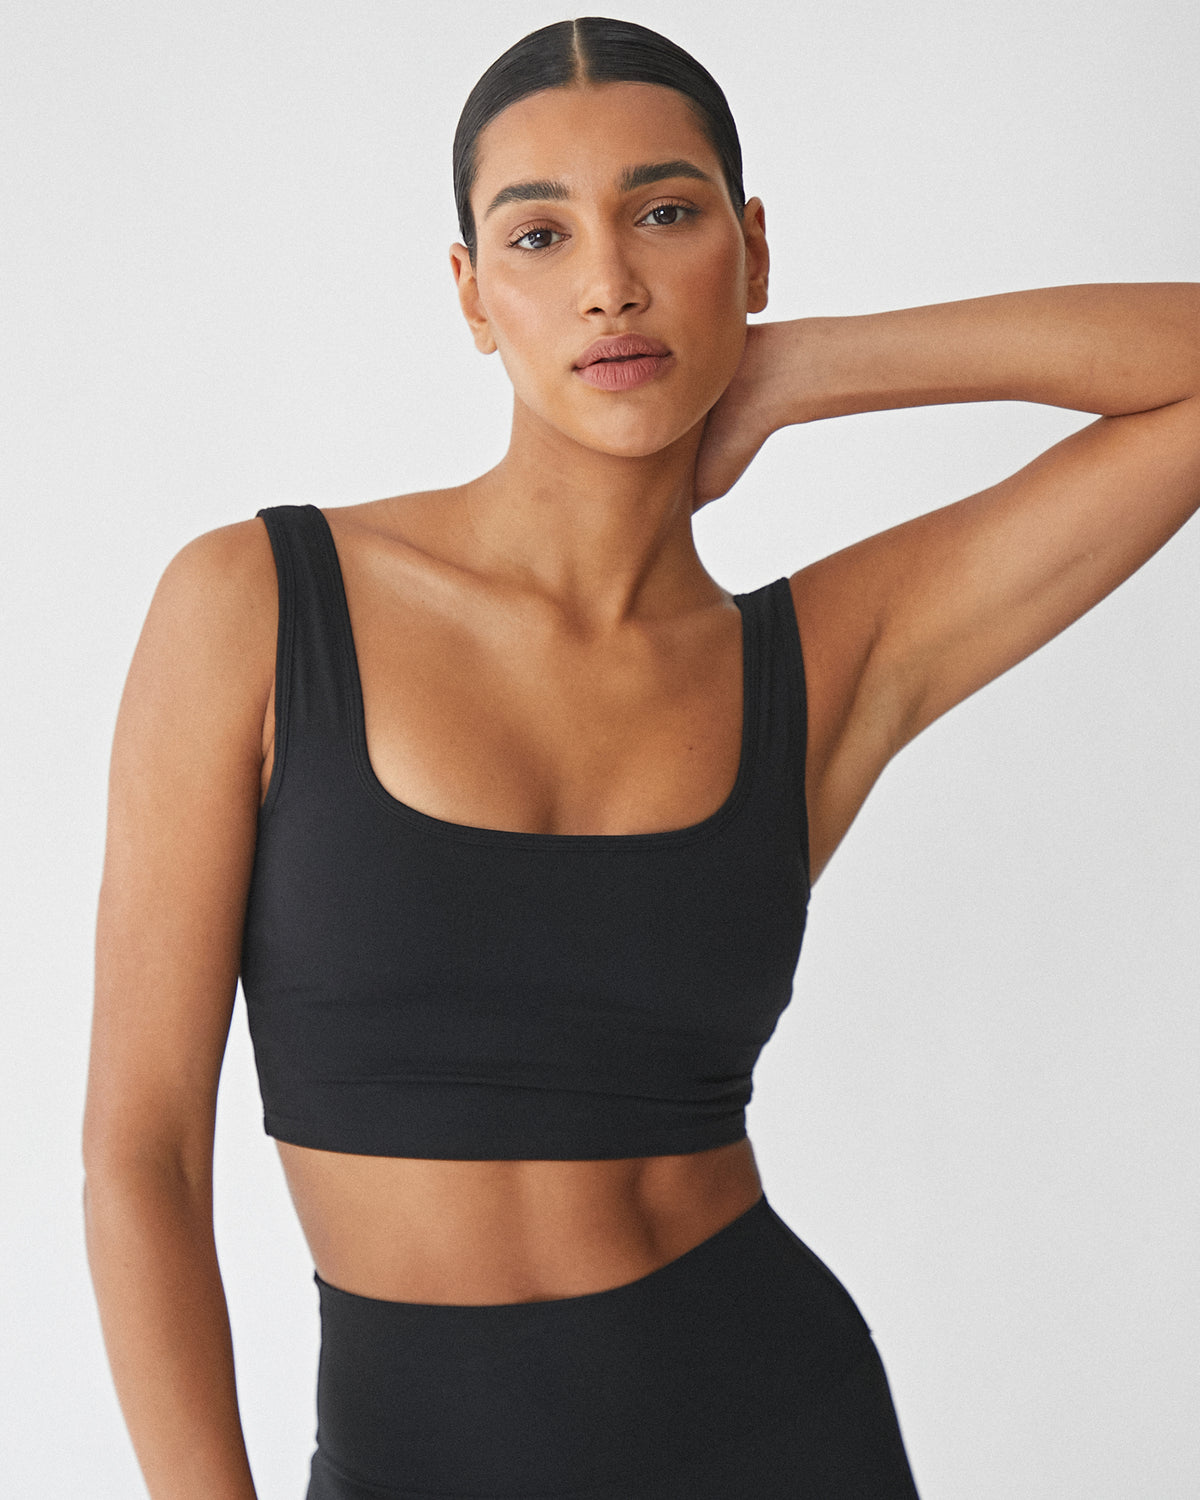 how to wear a bra with square neck tops